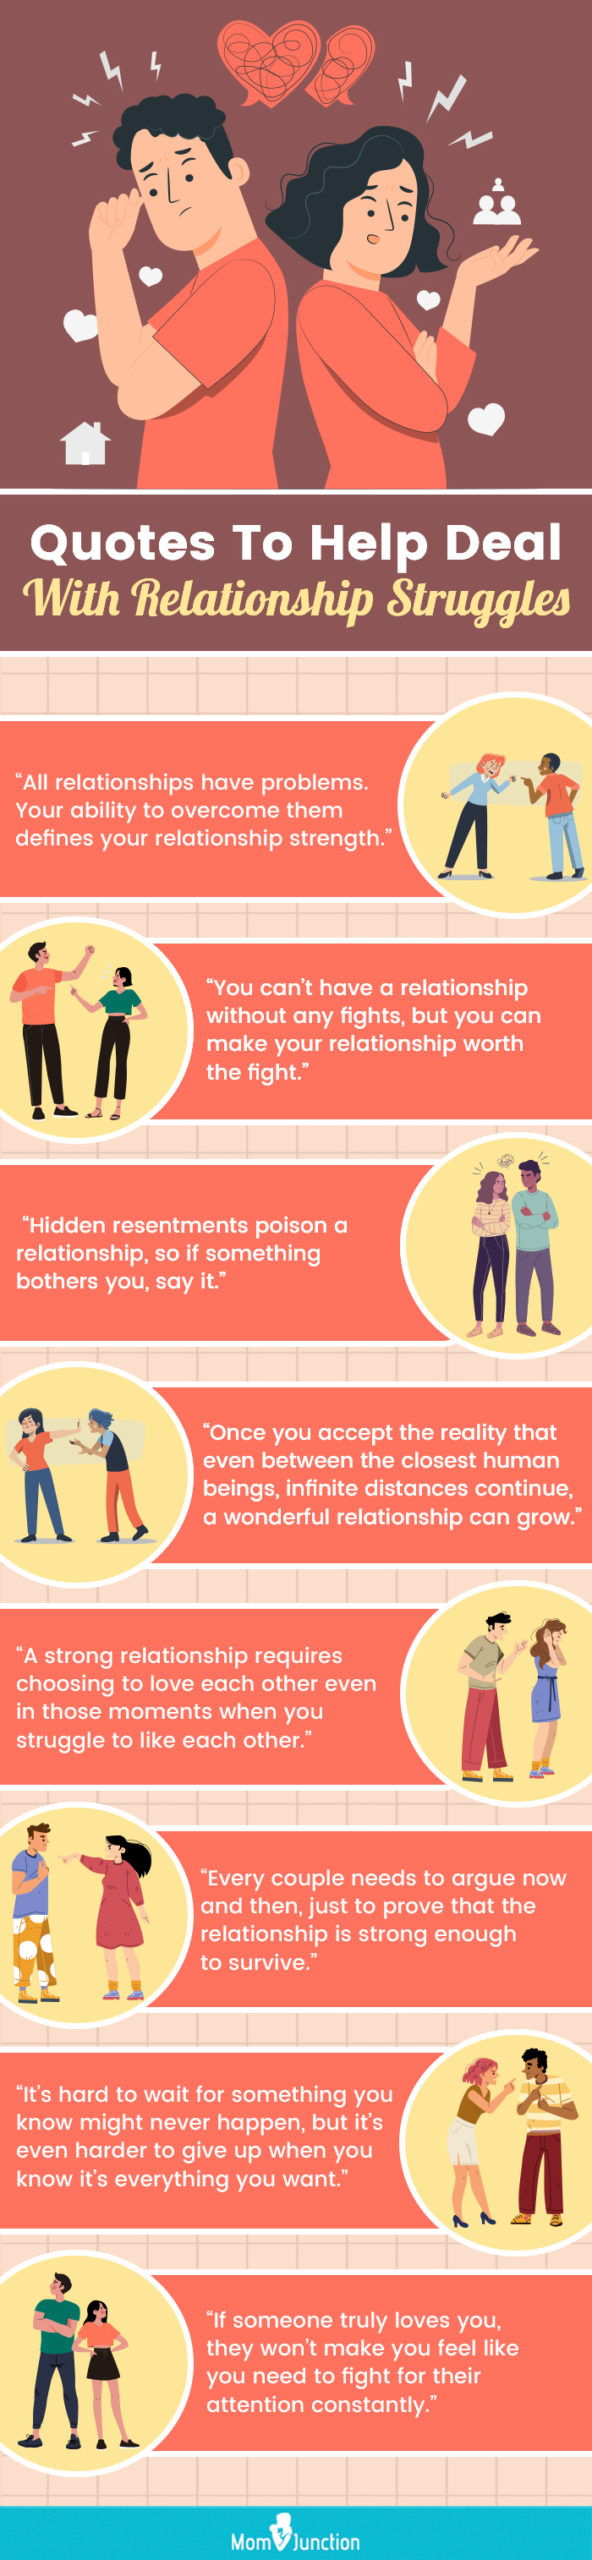 quotes about relationships being hard but worth it